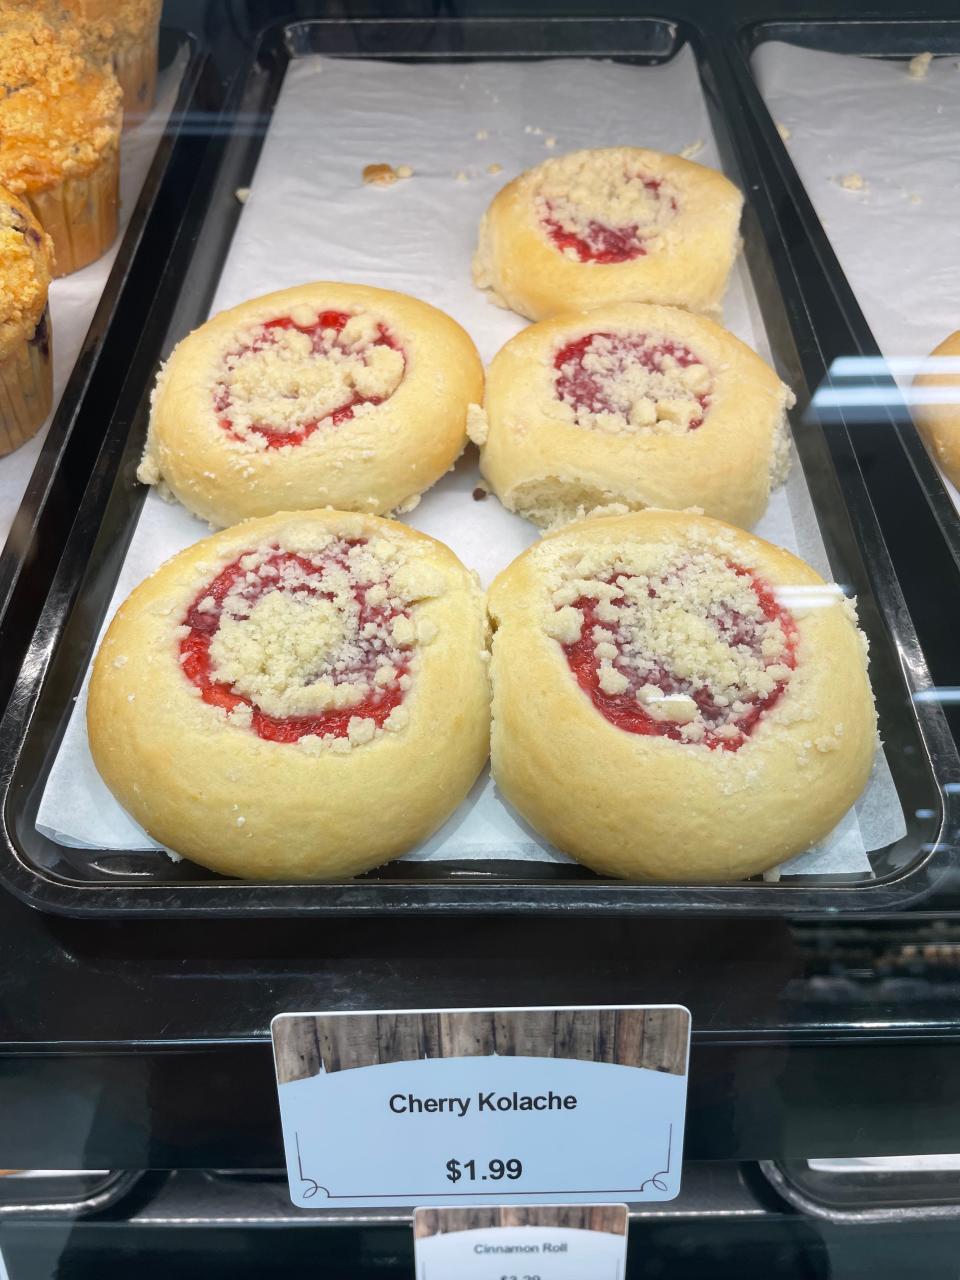 Buc-ee's is known for its kolache, which are a culinary phenomenon in Texas, where Buc-ee’s is based. The cherry kolach is a sweet, doughy pastry.